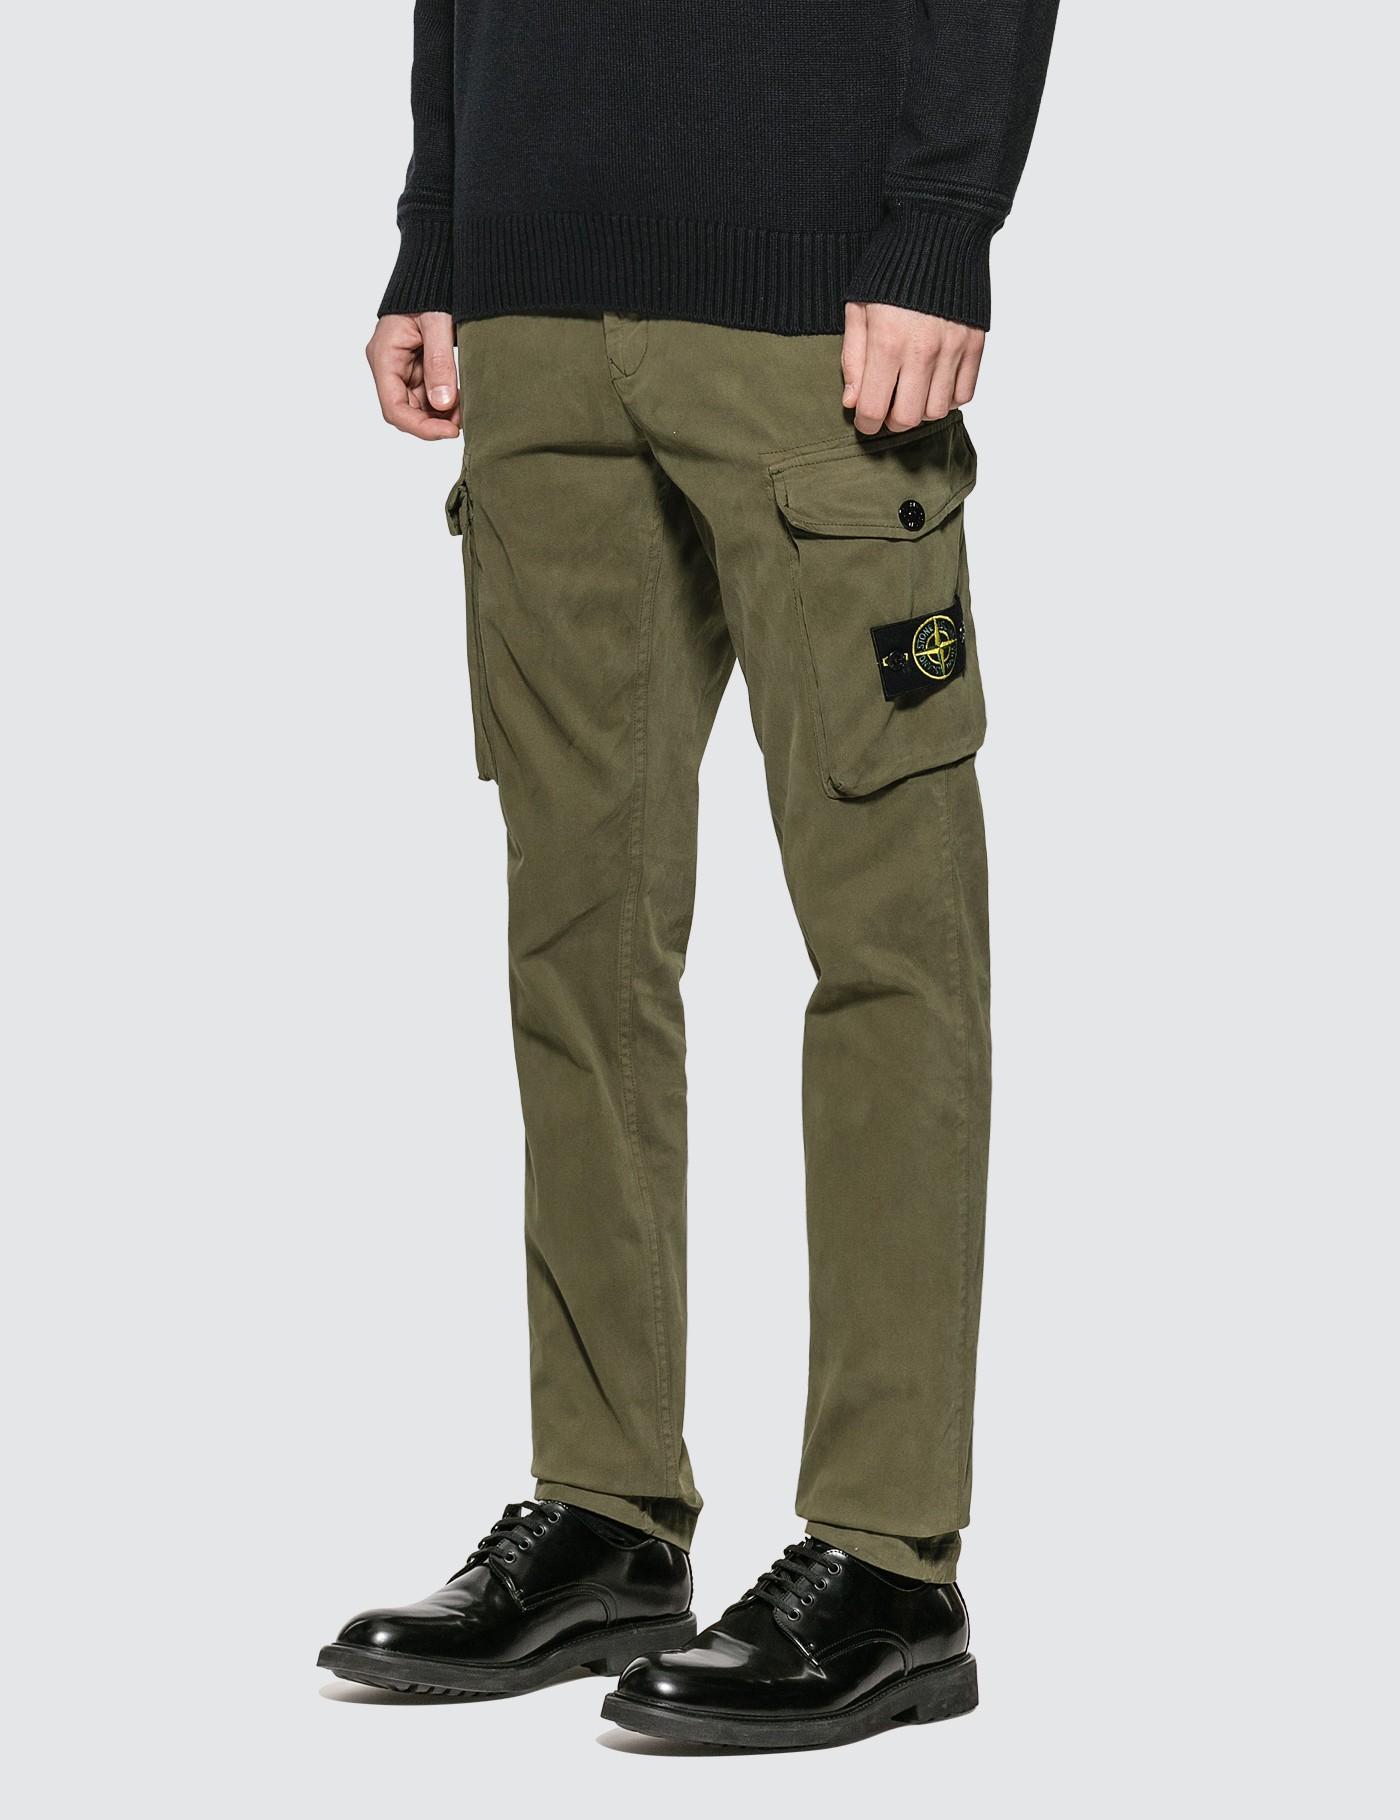 Stone Island Cotton Slim Fit Cargo Pants in Green for Men - Lyst